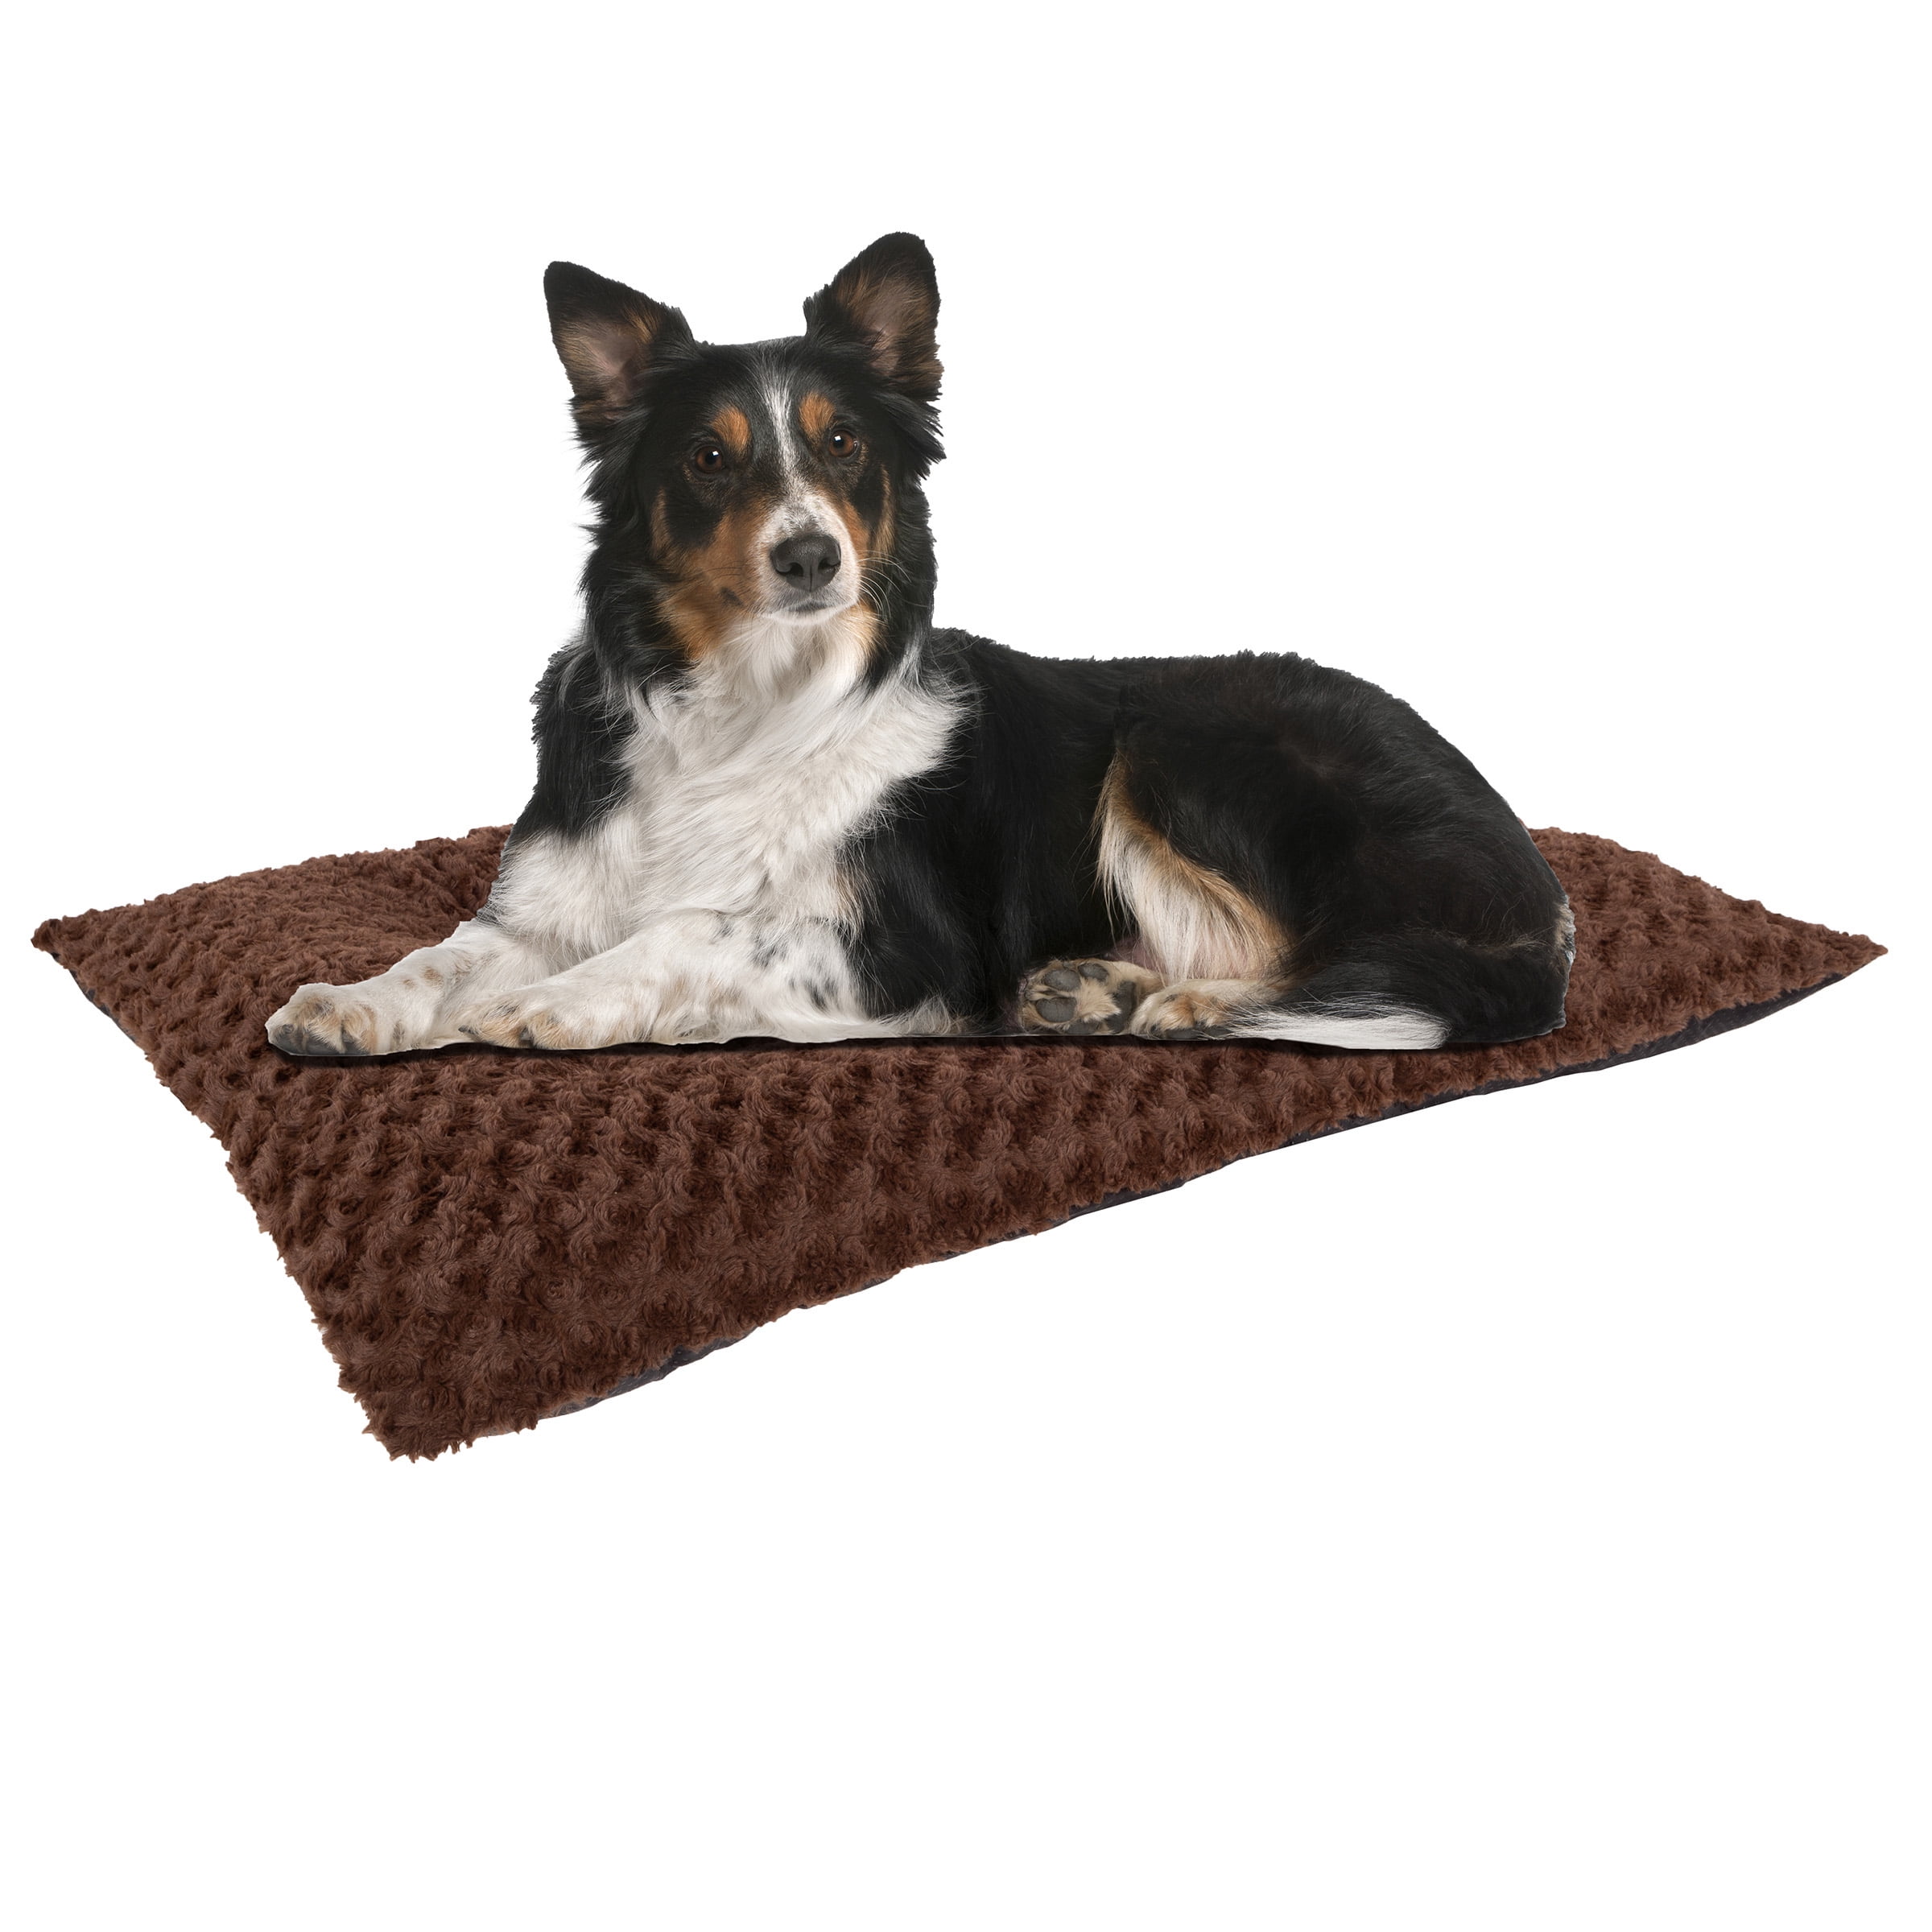 Dog Clothes and Accessories, Luxury Dog Beds & Crate Covers, Pet Carriers,  Cat Dog Toys, 4-legged Pet Boutique